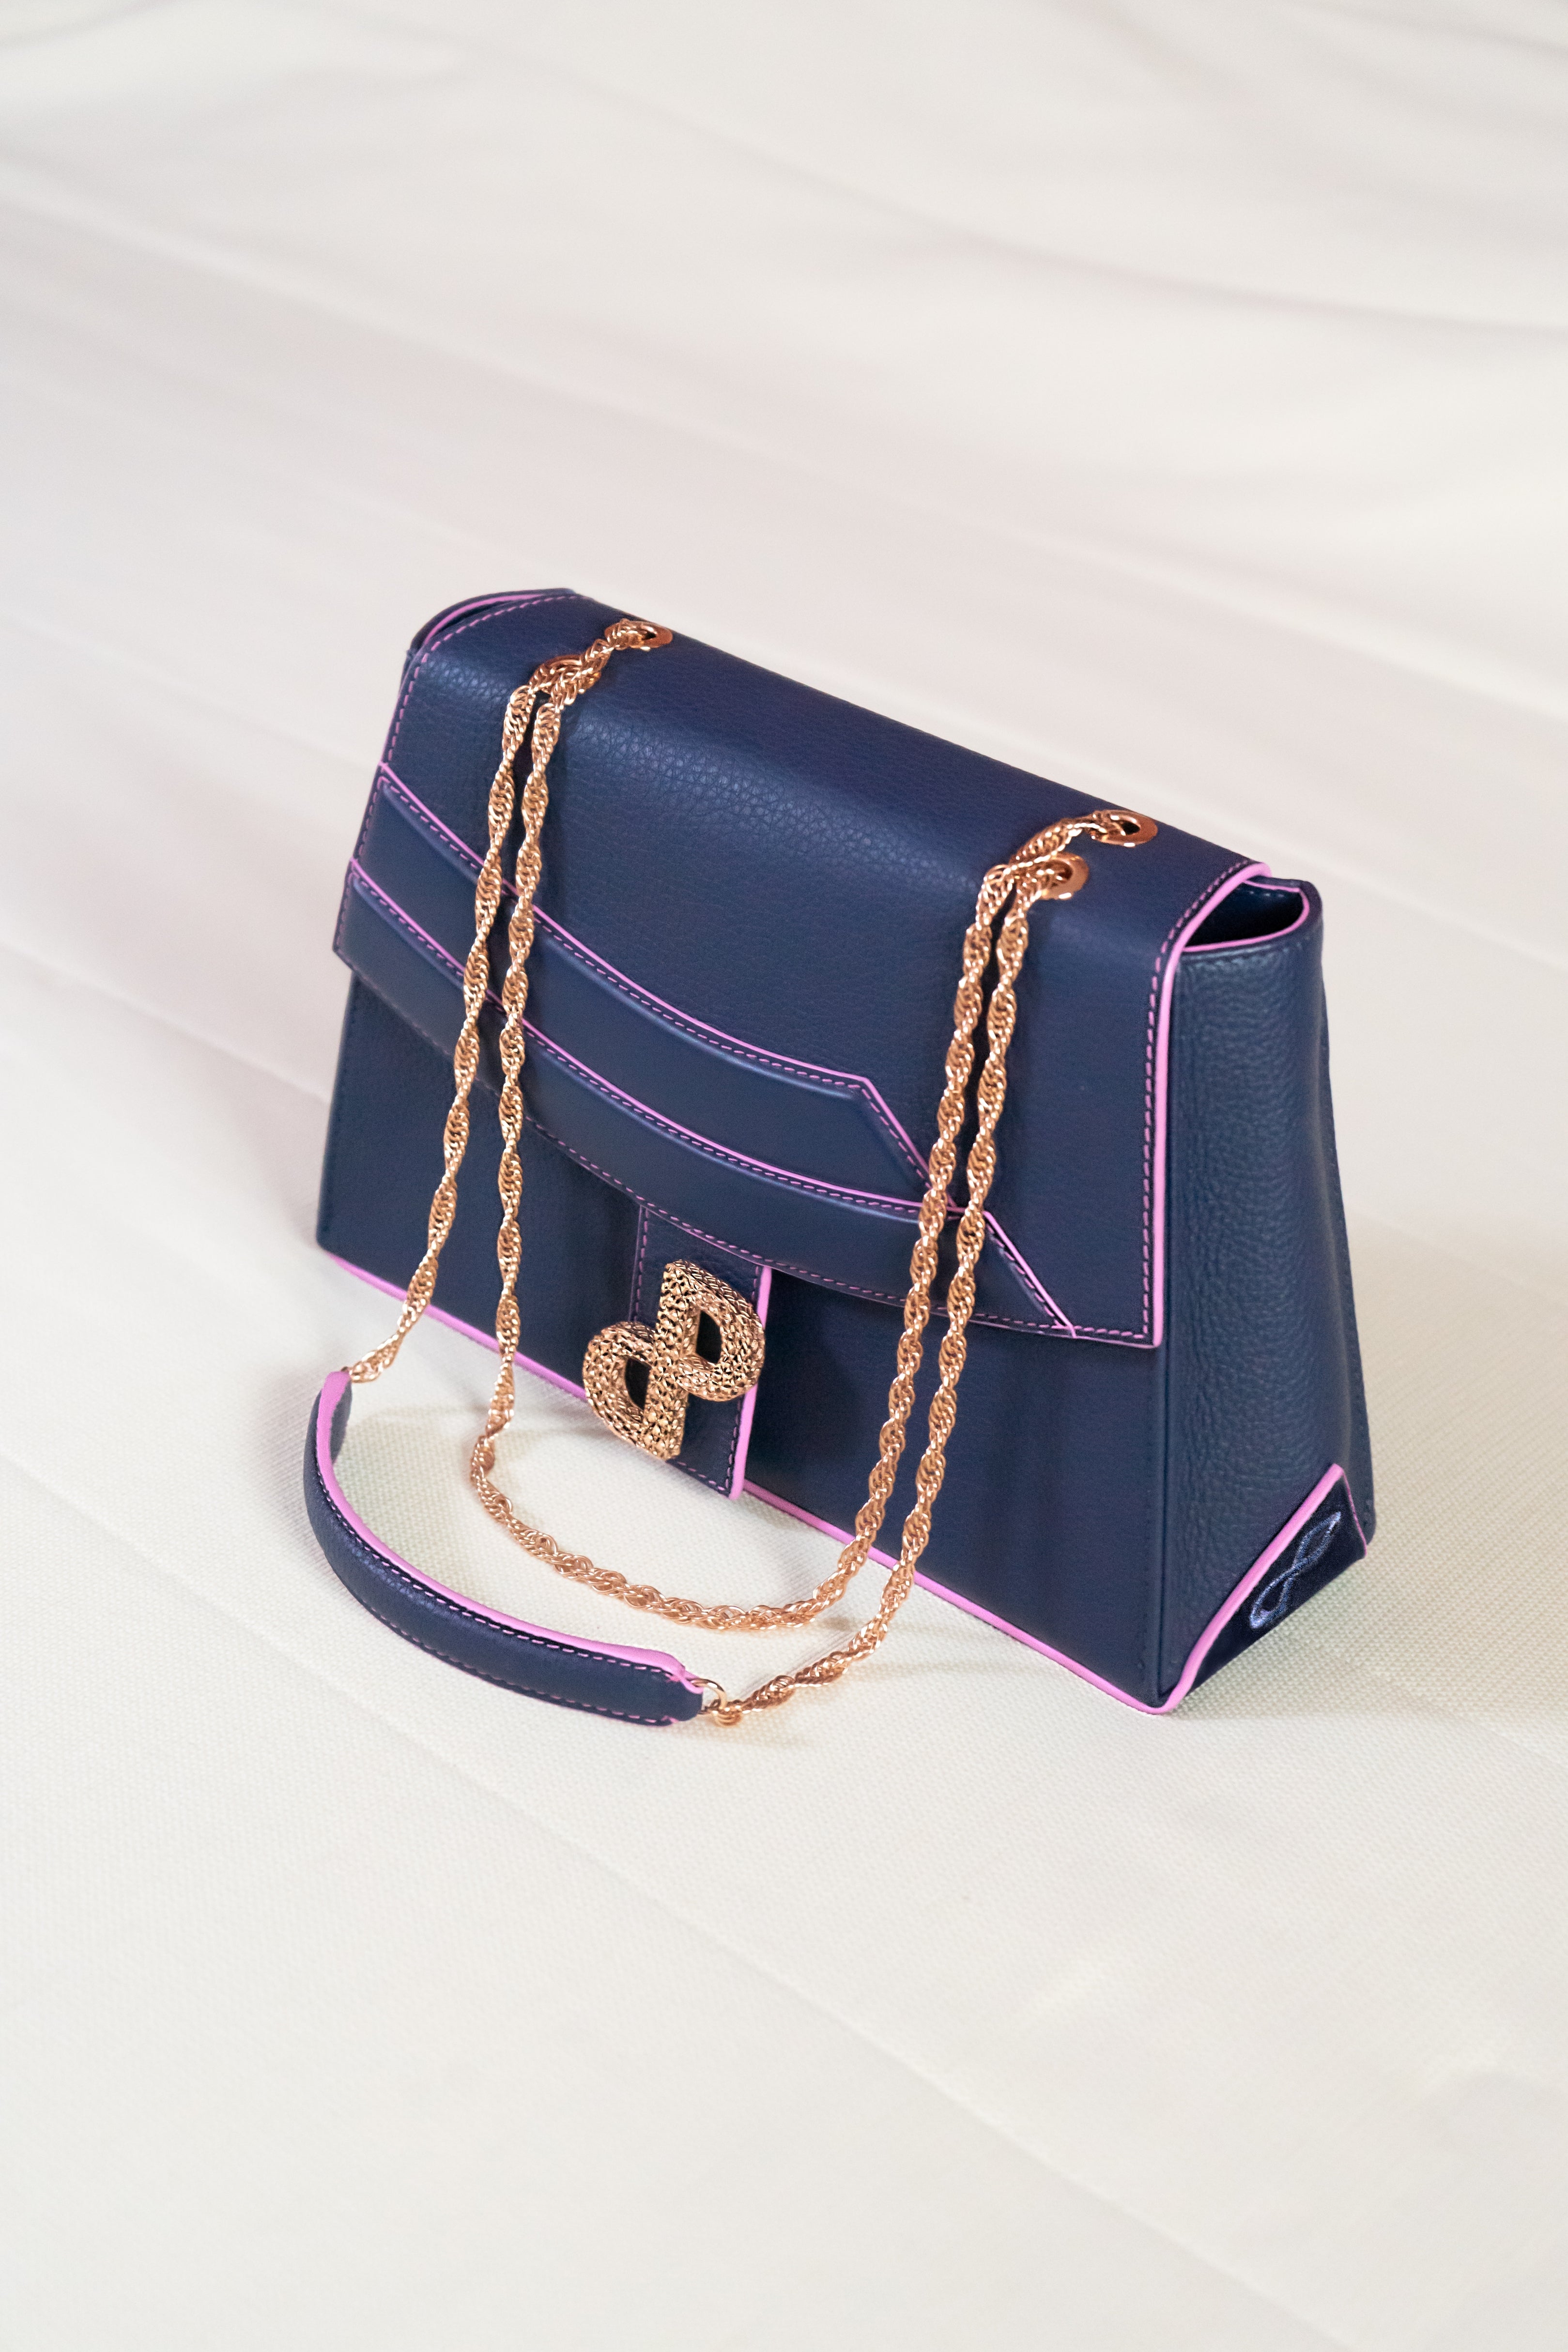 The LIVIA messenger bag bag in 3D hardware. Inspiration from the Roman Colosseum - All MADE IN ITALY